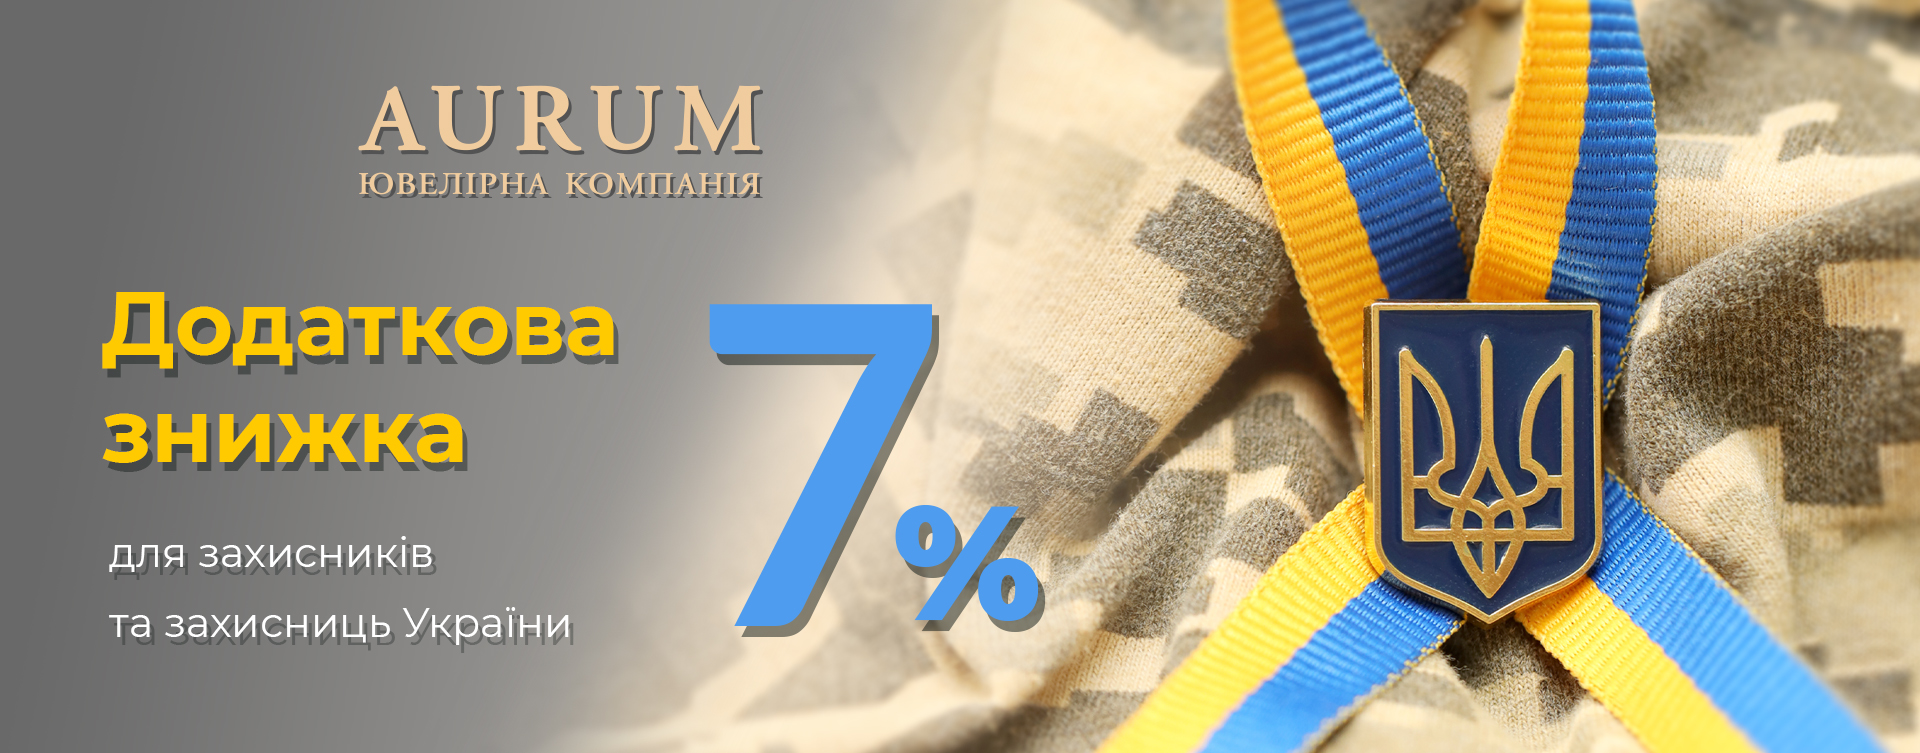 AURUM gives an additional discount of 7%